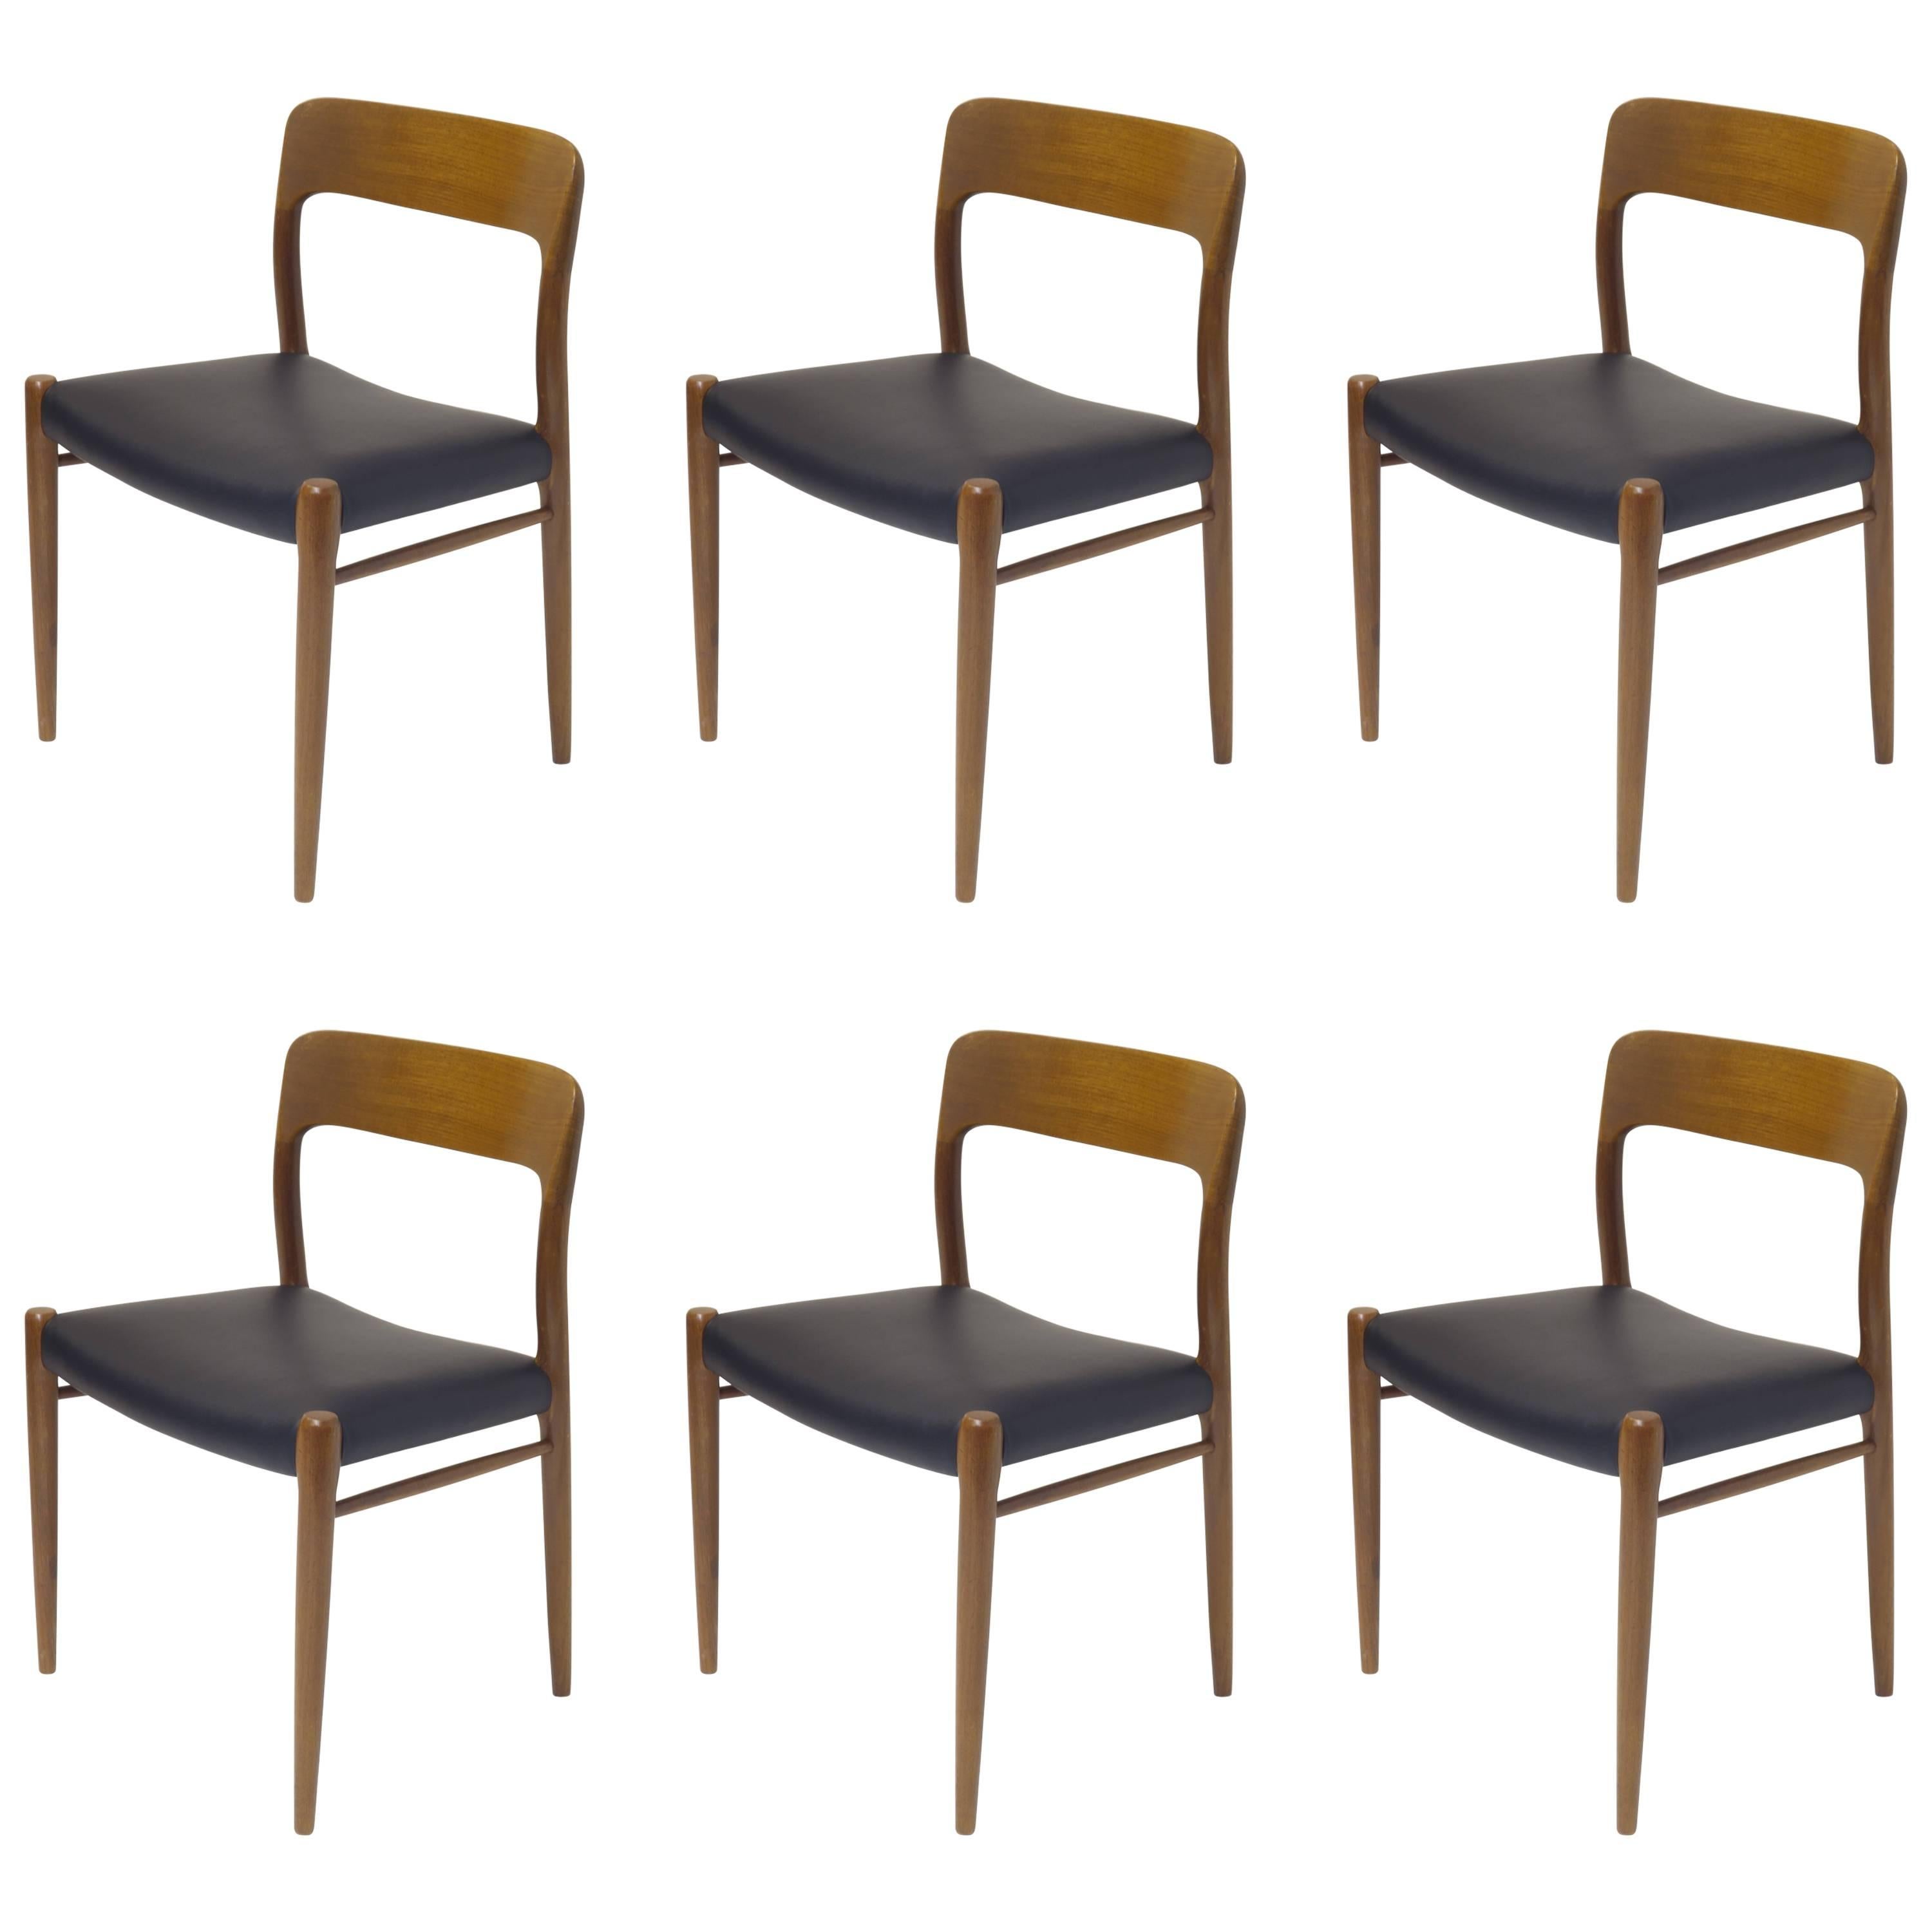 Six Teakwood Leather Midcentury Easy Chairs by J.L. Moeller, Denmark For Sale